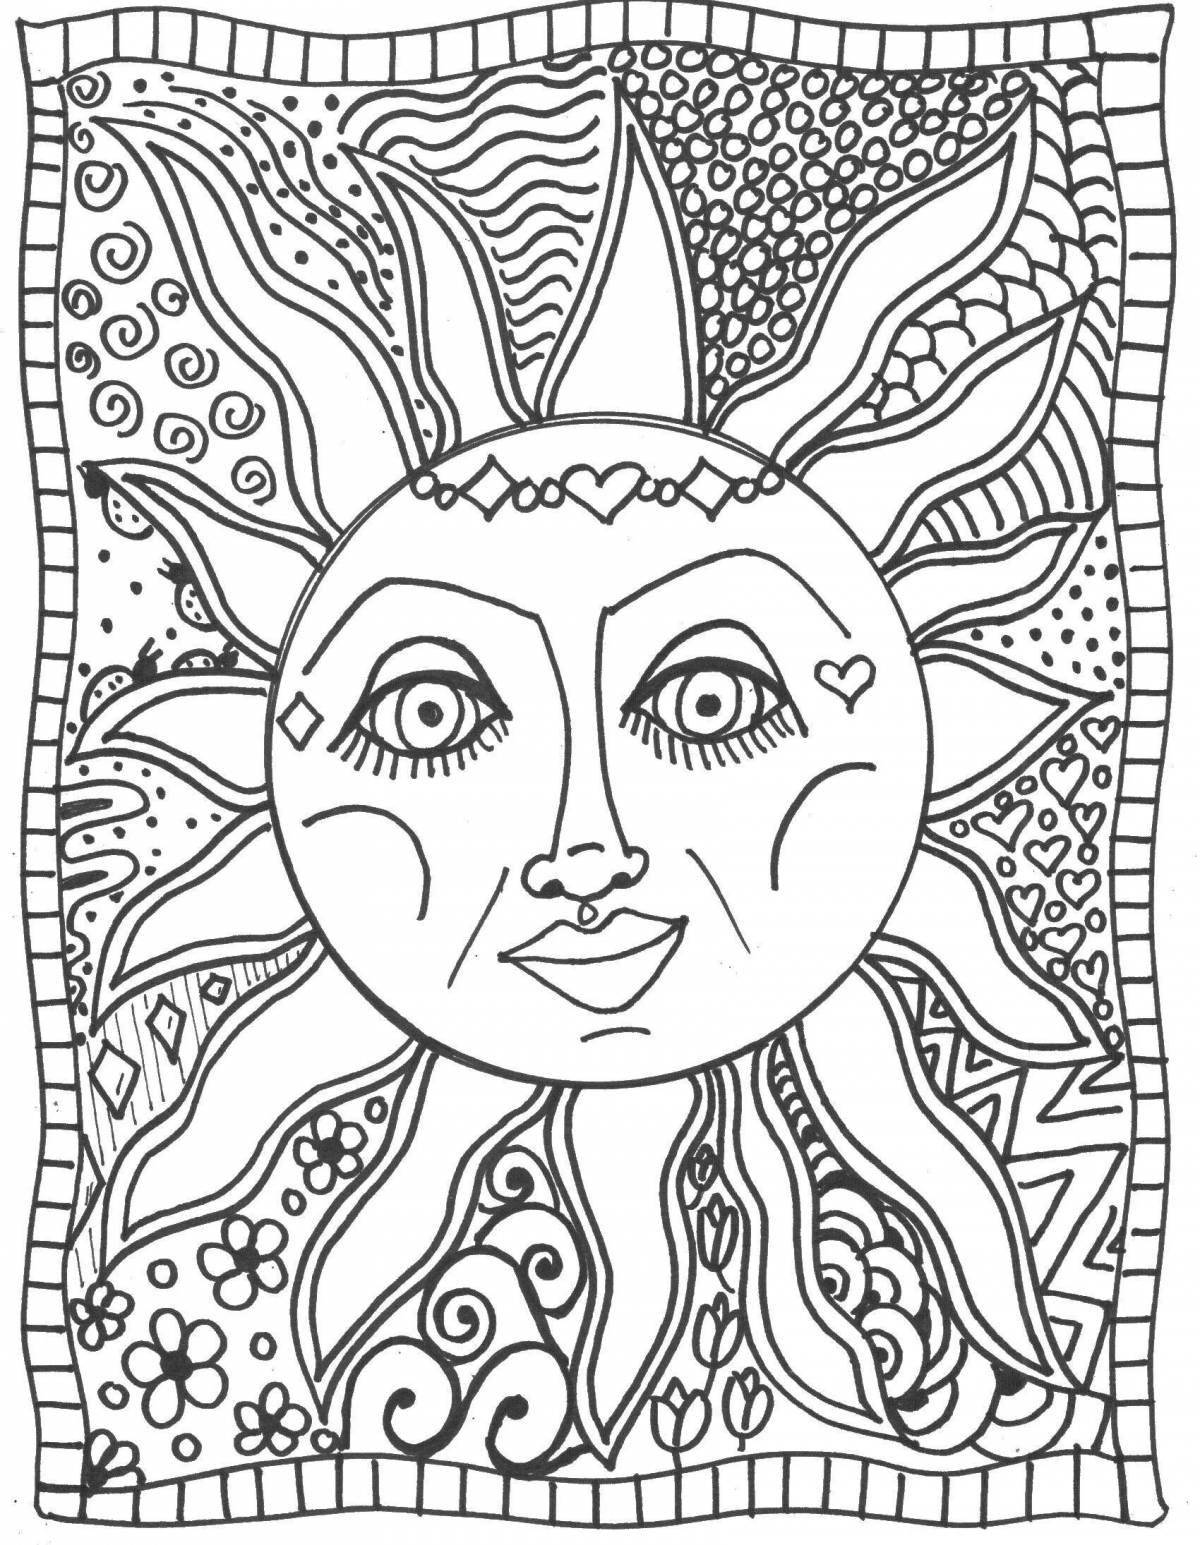 Magic hippie coloring page